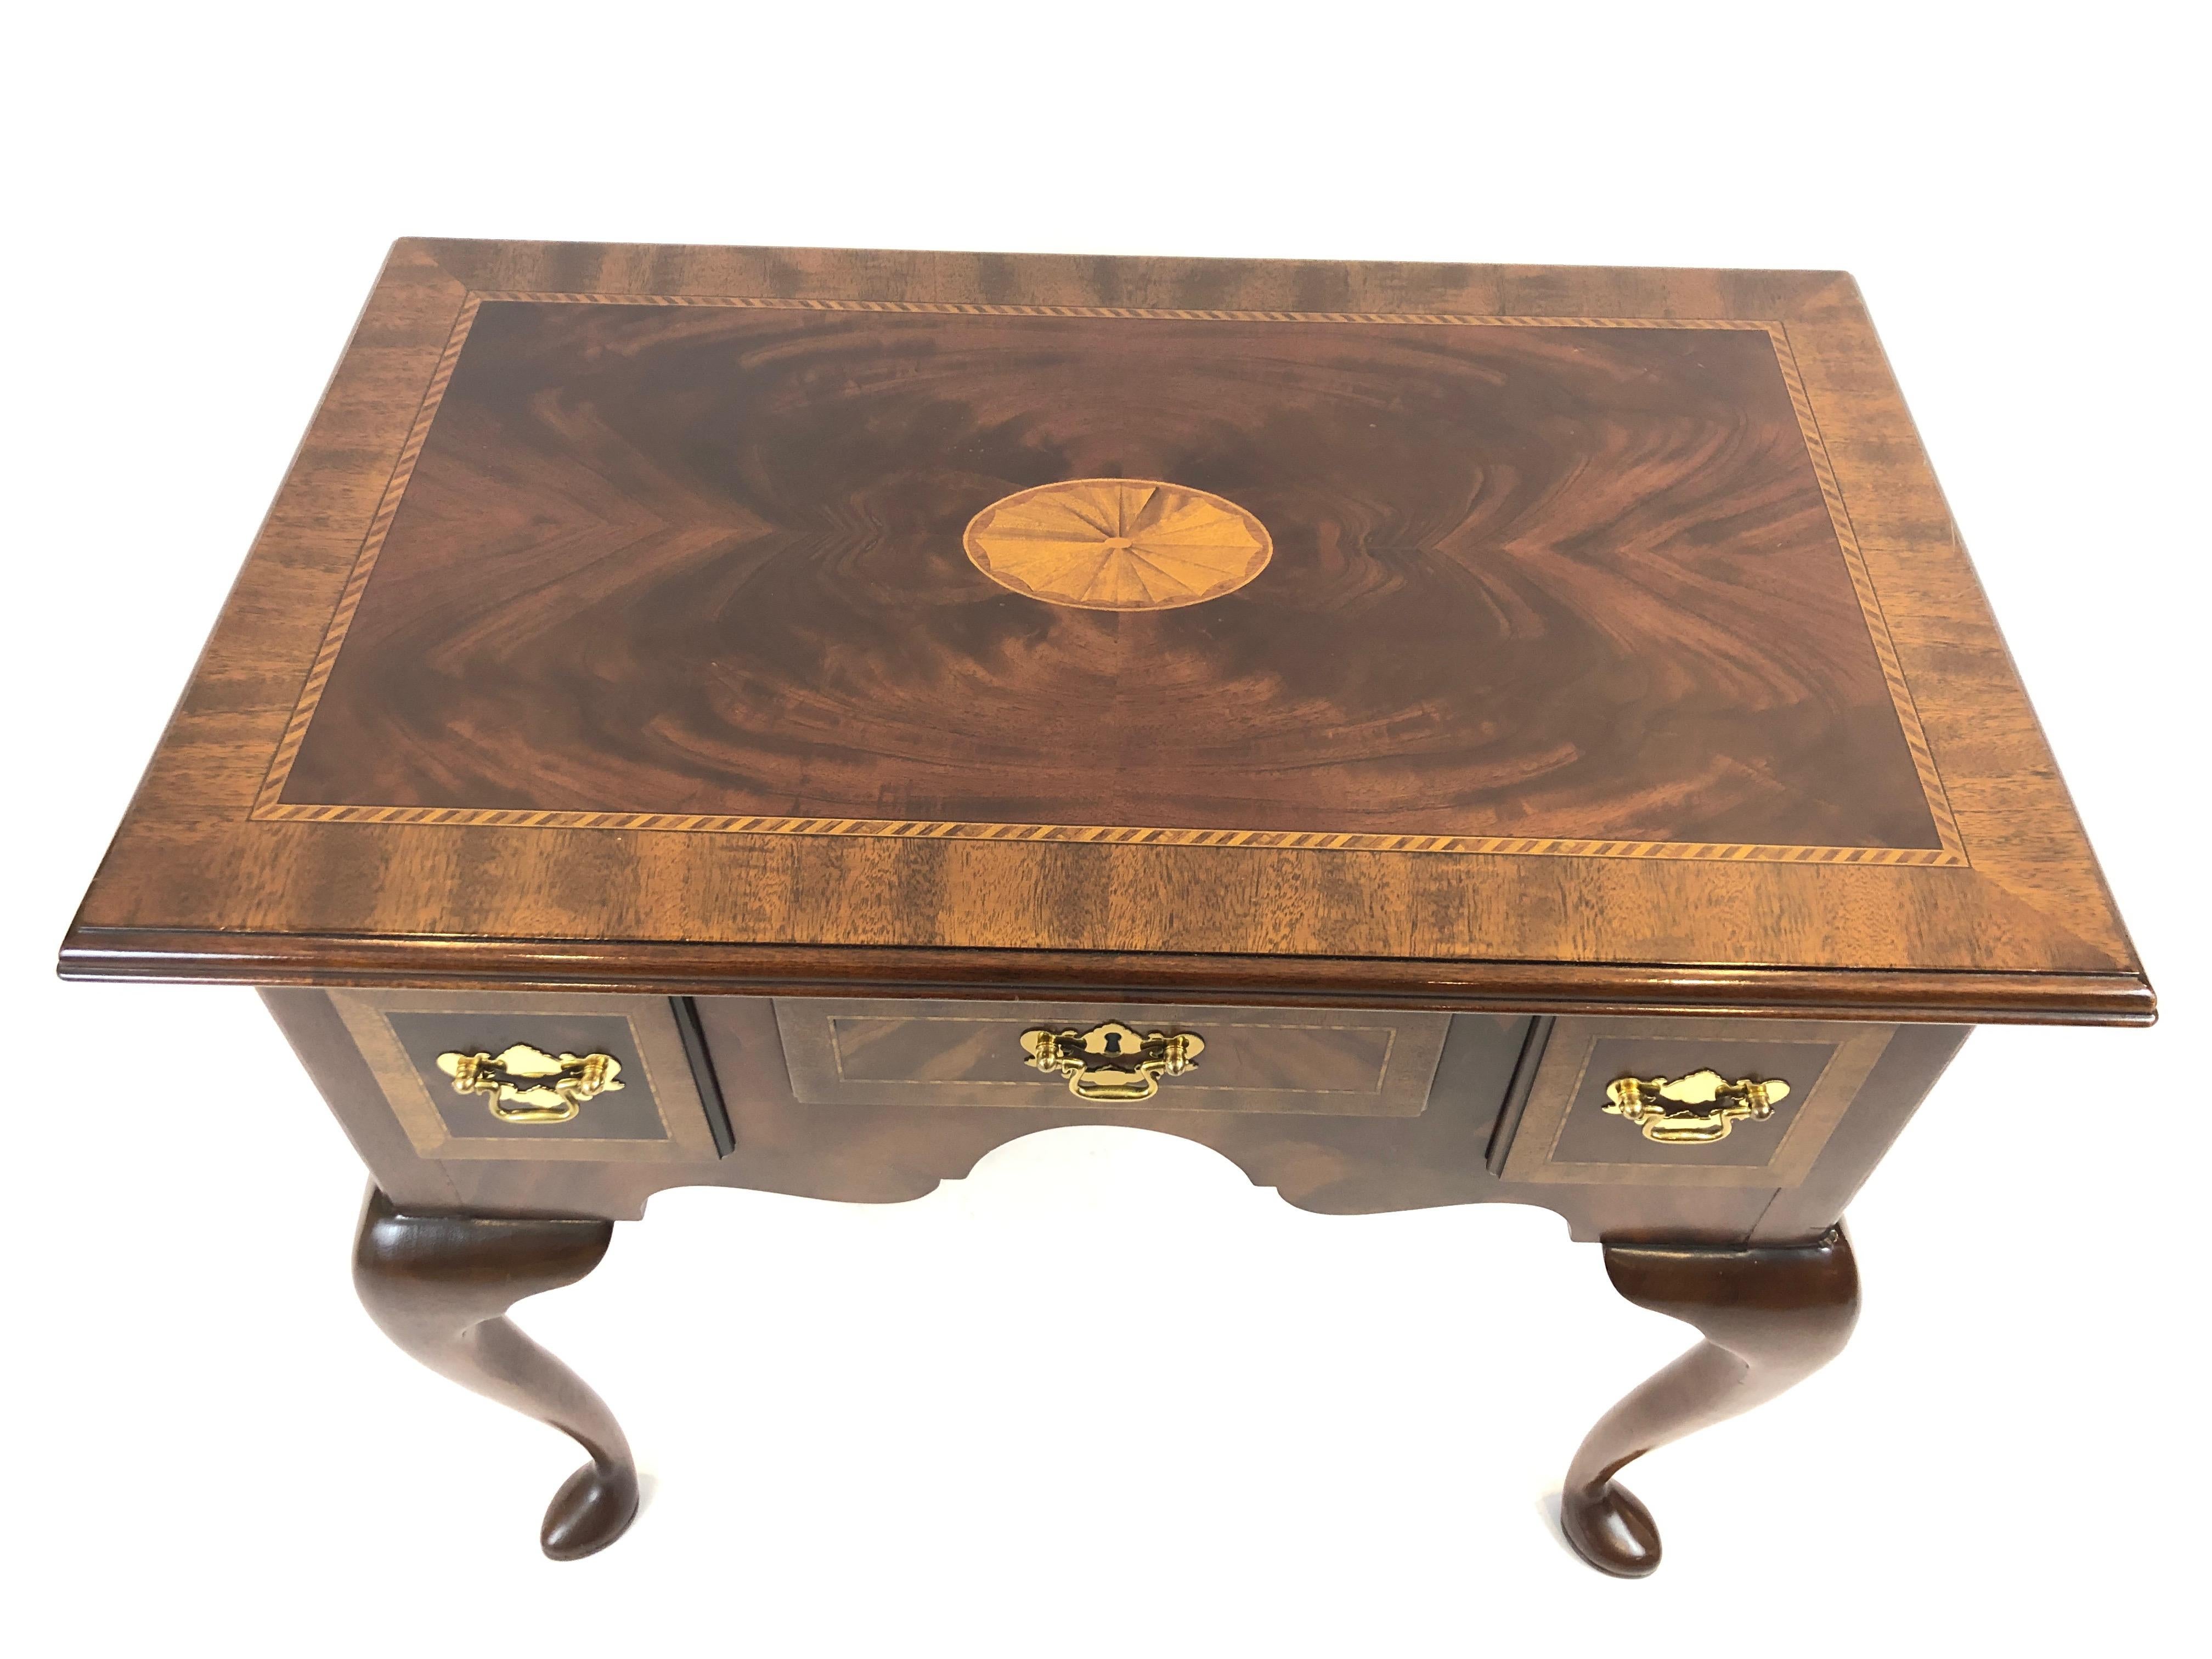 A handsome traditional style flame mahogany inlaid low boy or small console with 3 drawers having lovely satinwood fan design in the center of the top, Chippendalesque brass hardware, and cabriole legs terminating in pad feet.